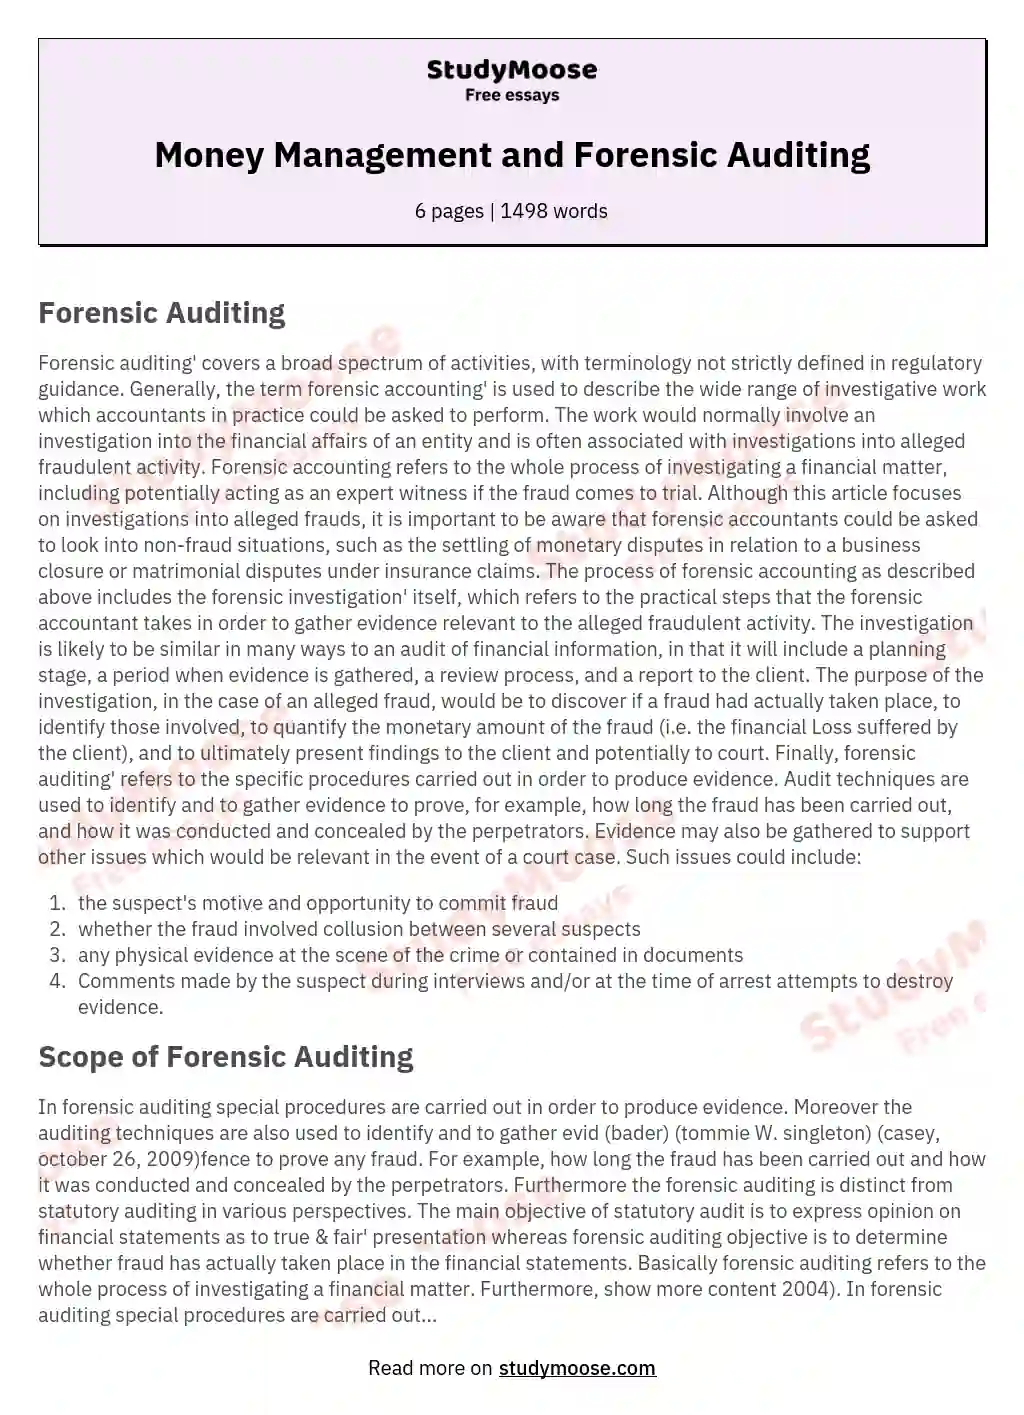 Money Management and Forensic Auditing essay